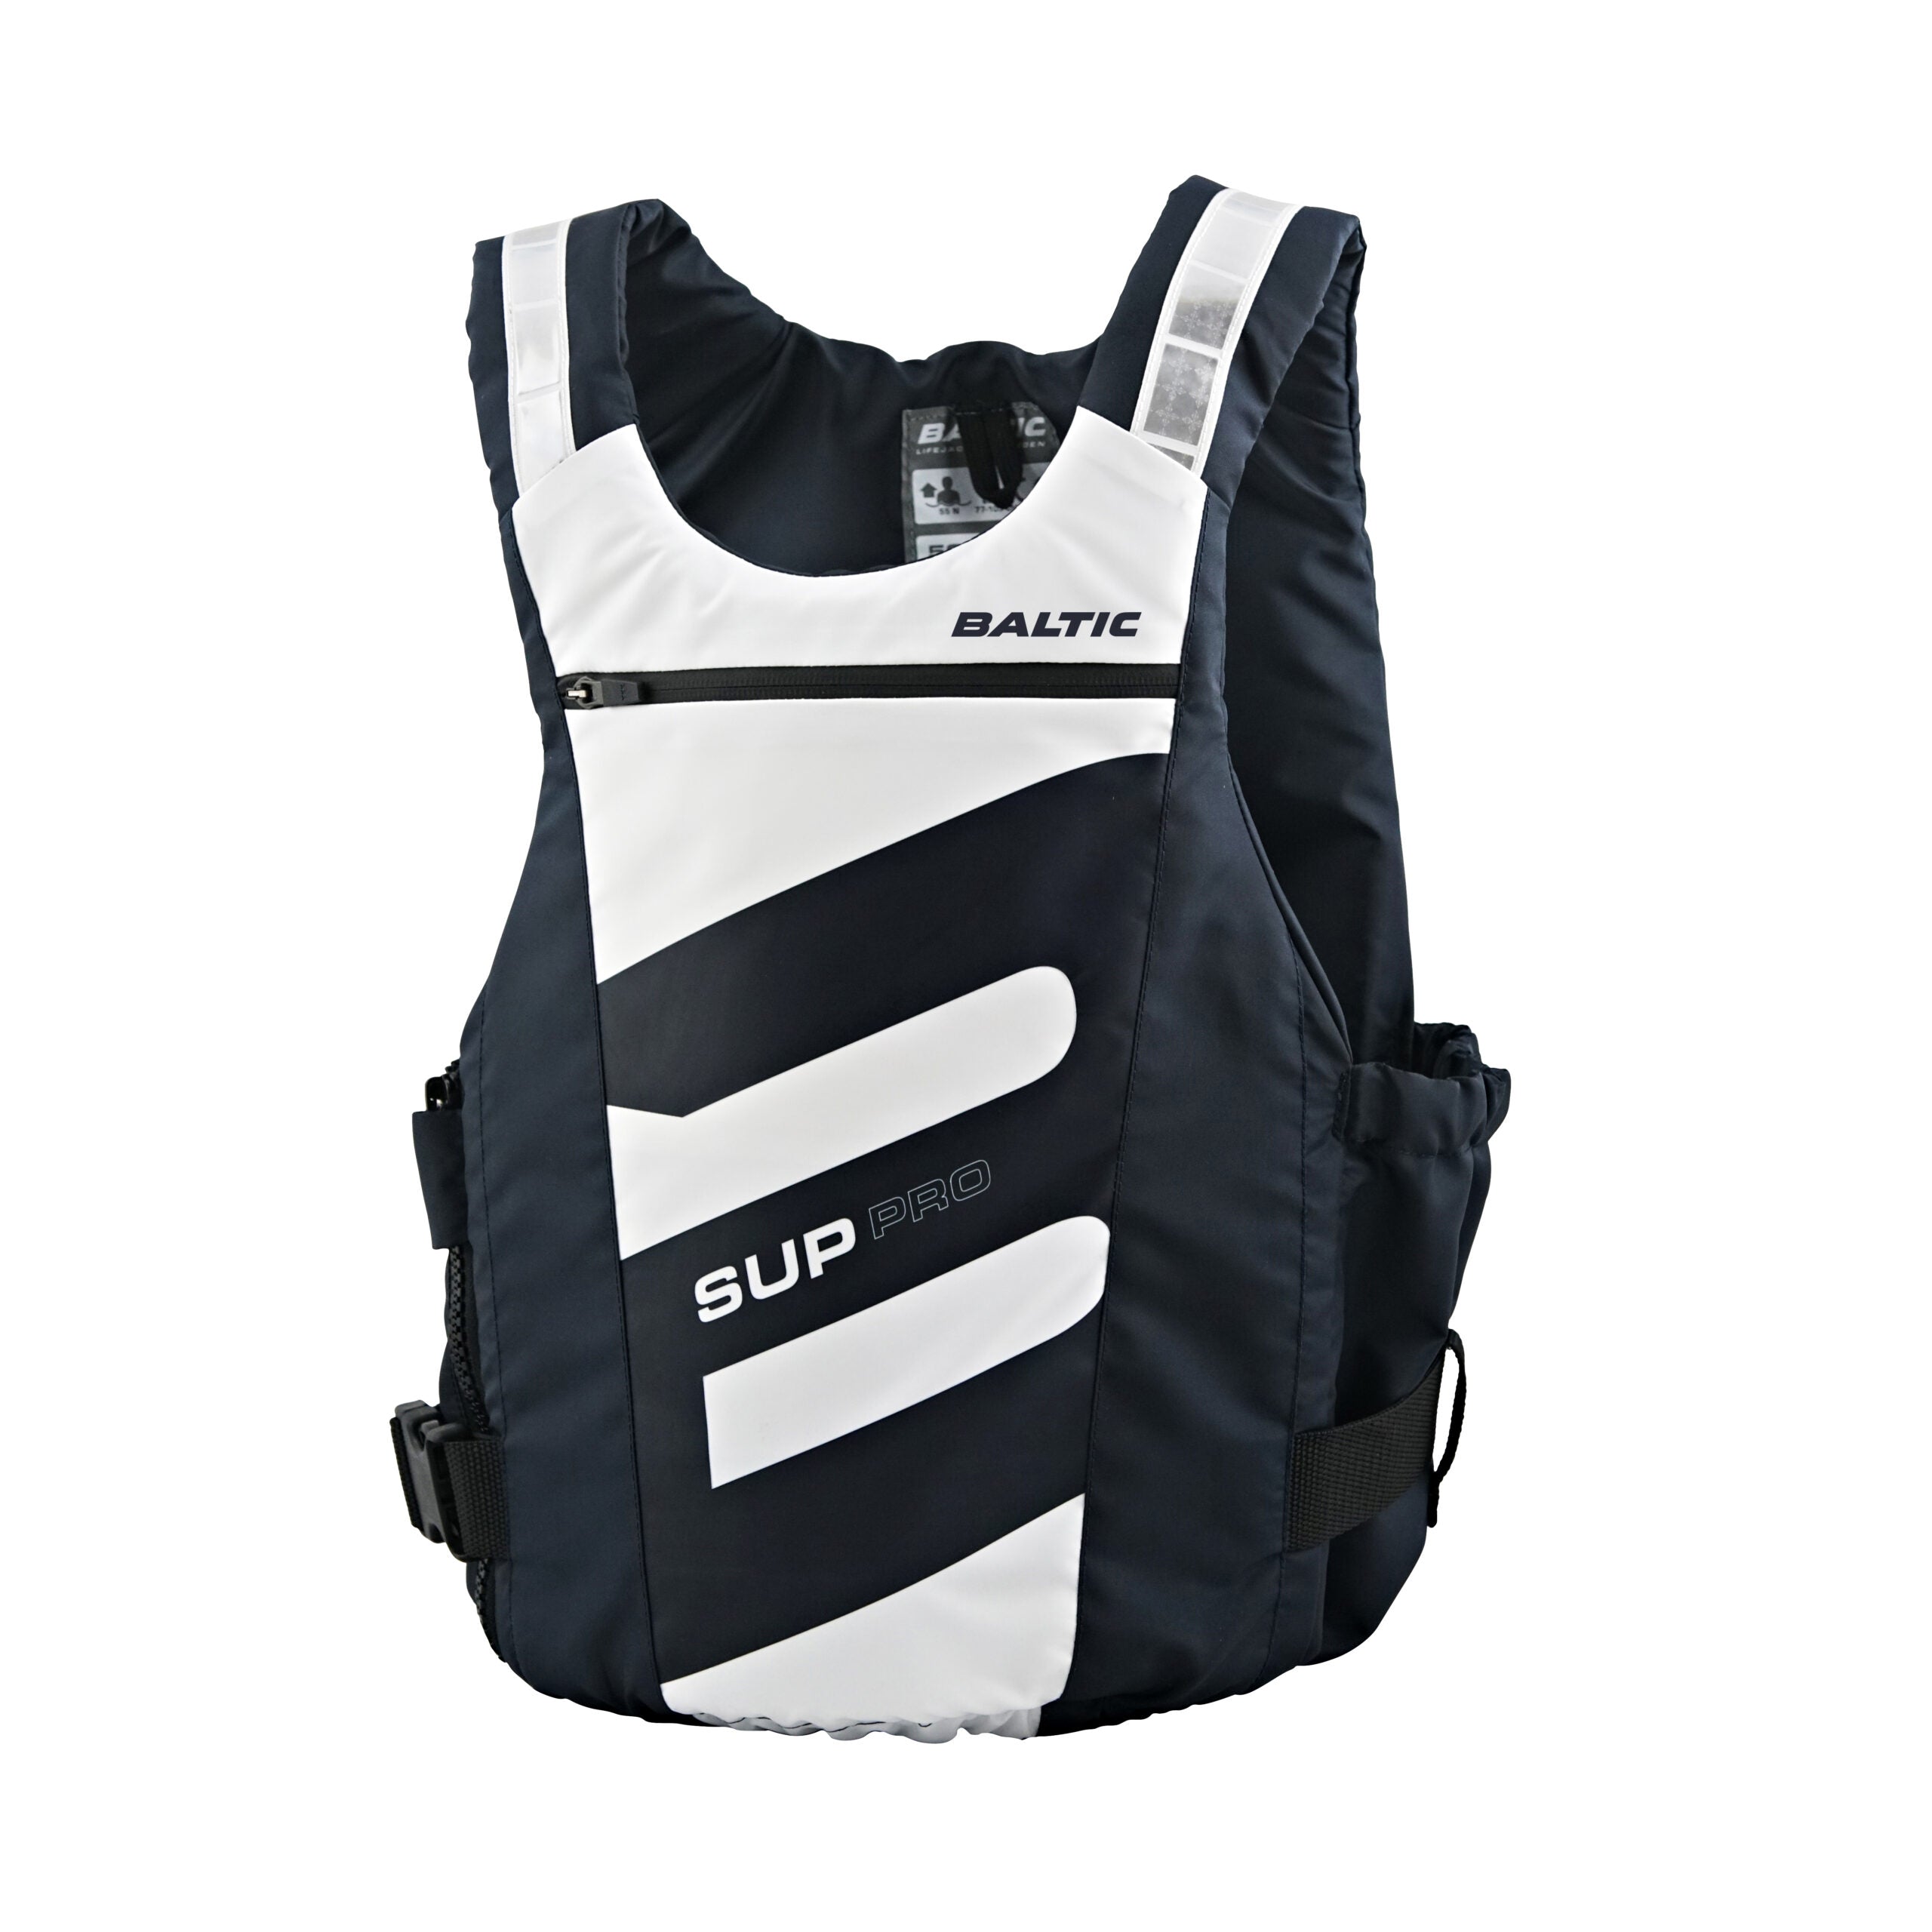 baltic-sup-pro-buoyancy-aid-white-navy-5455-1-1-scaled